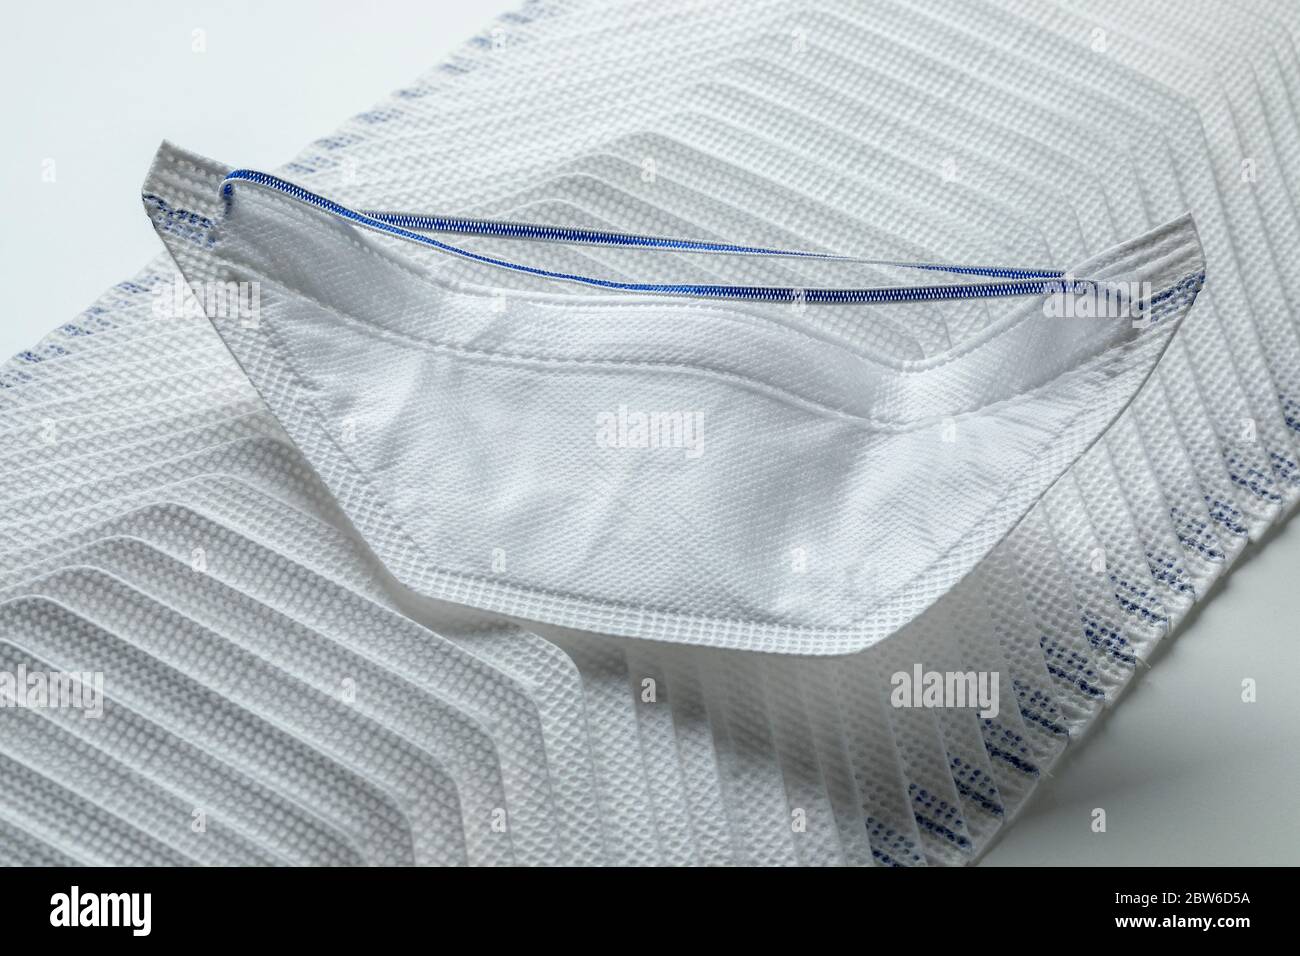 Row of medical protective face masks on white background Stock Photo